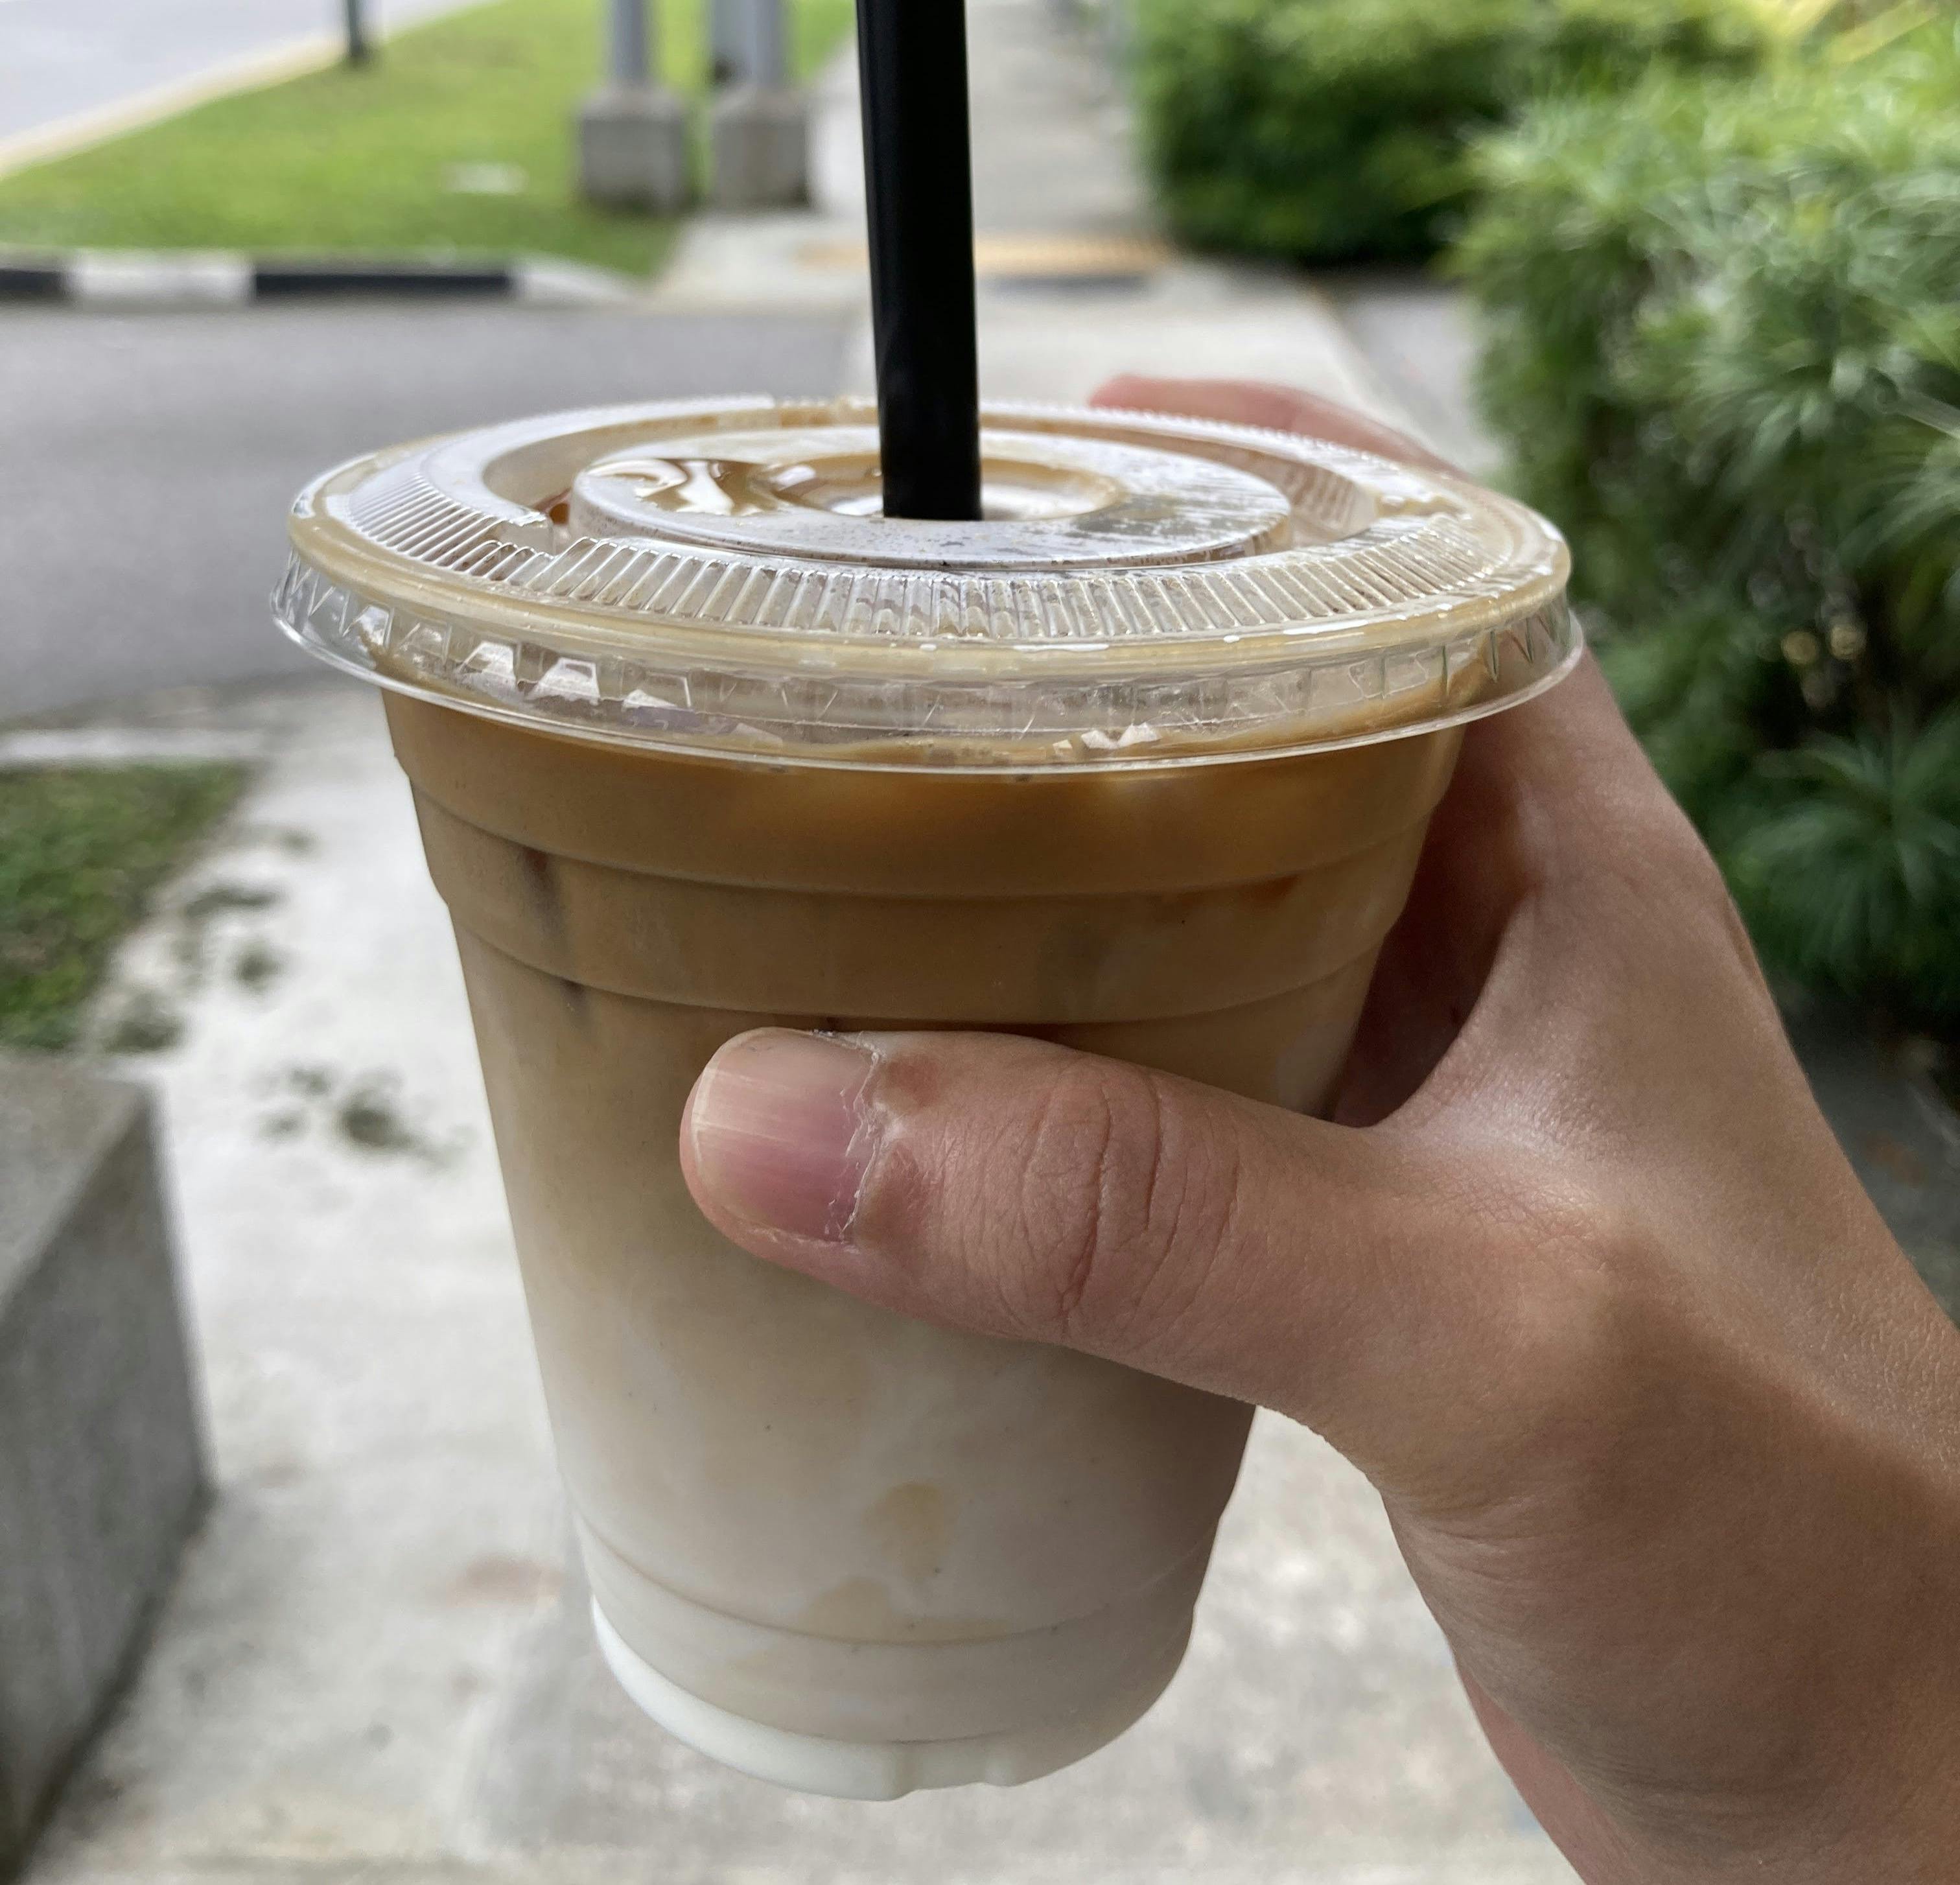 THE iced latte